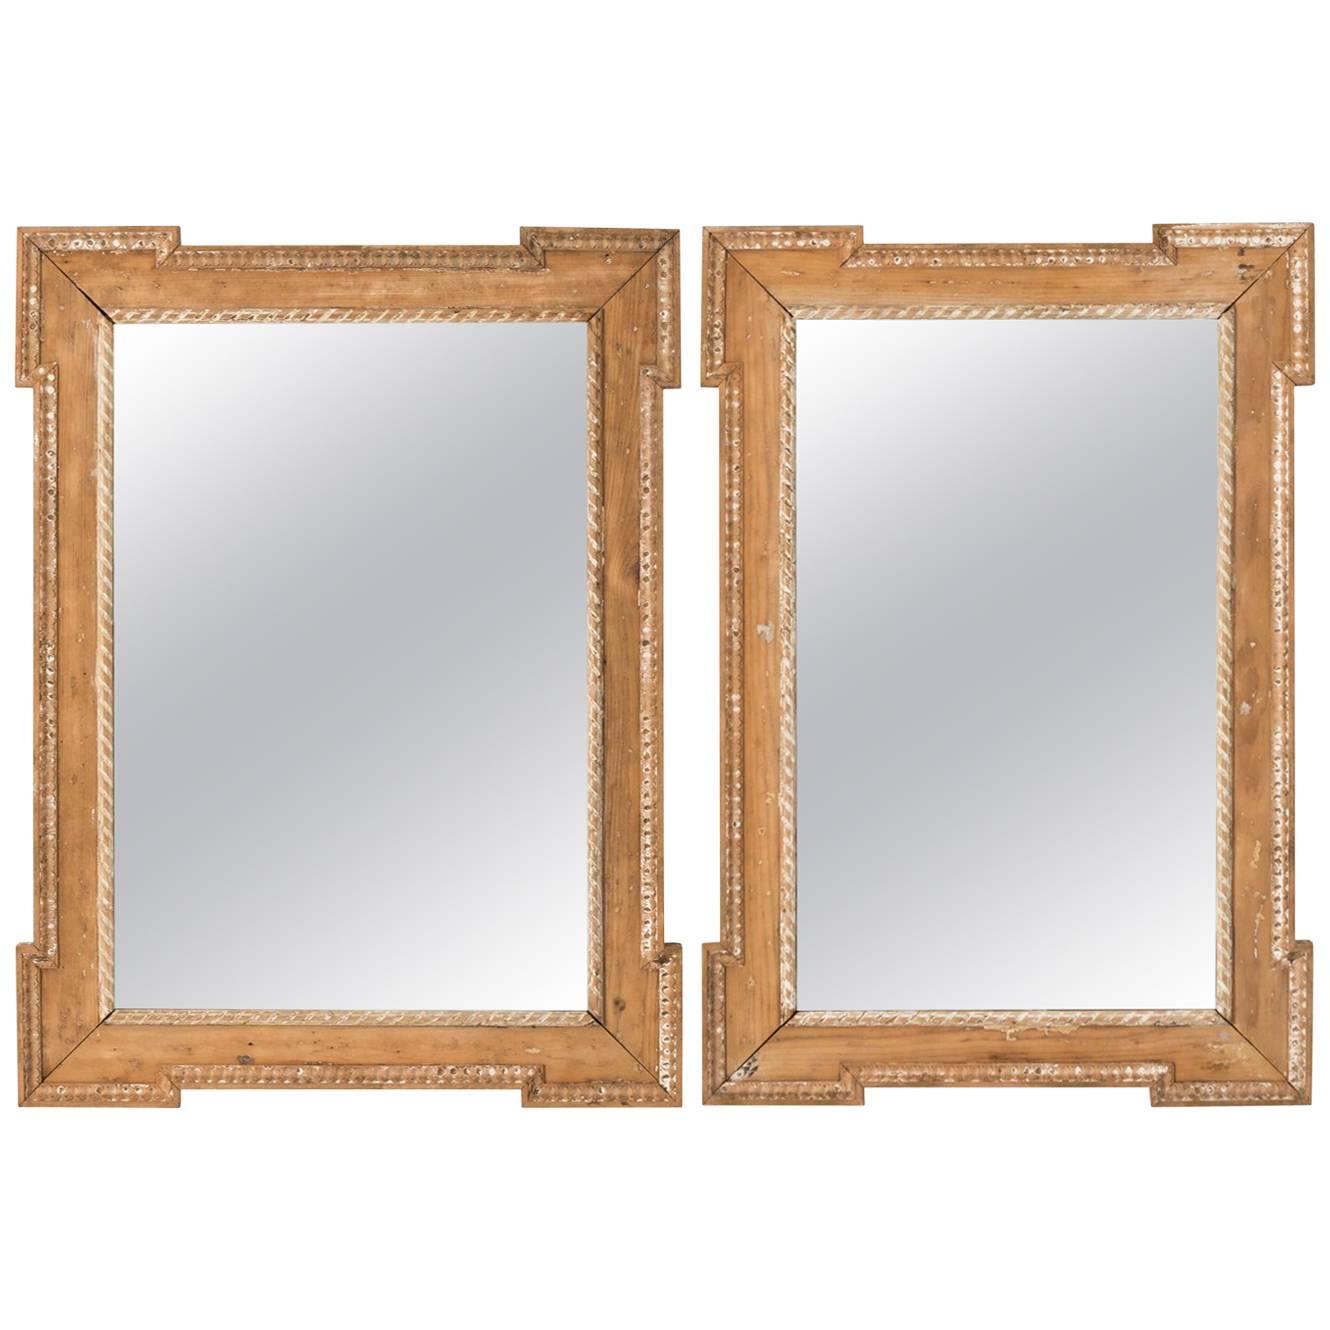 Pair of Pine Mirrors with Dog Ear Corners